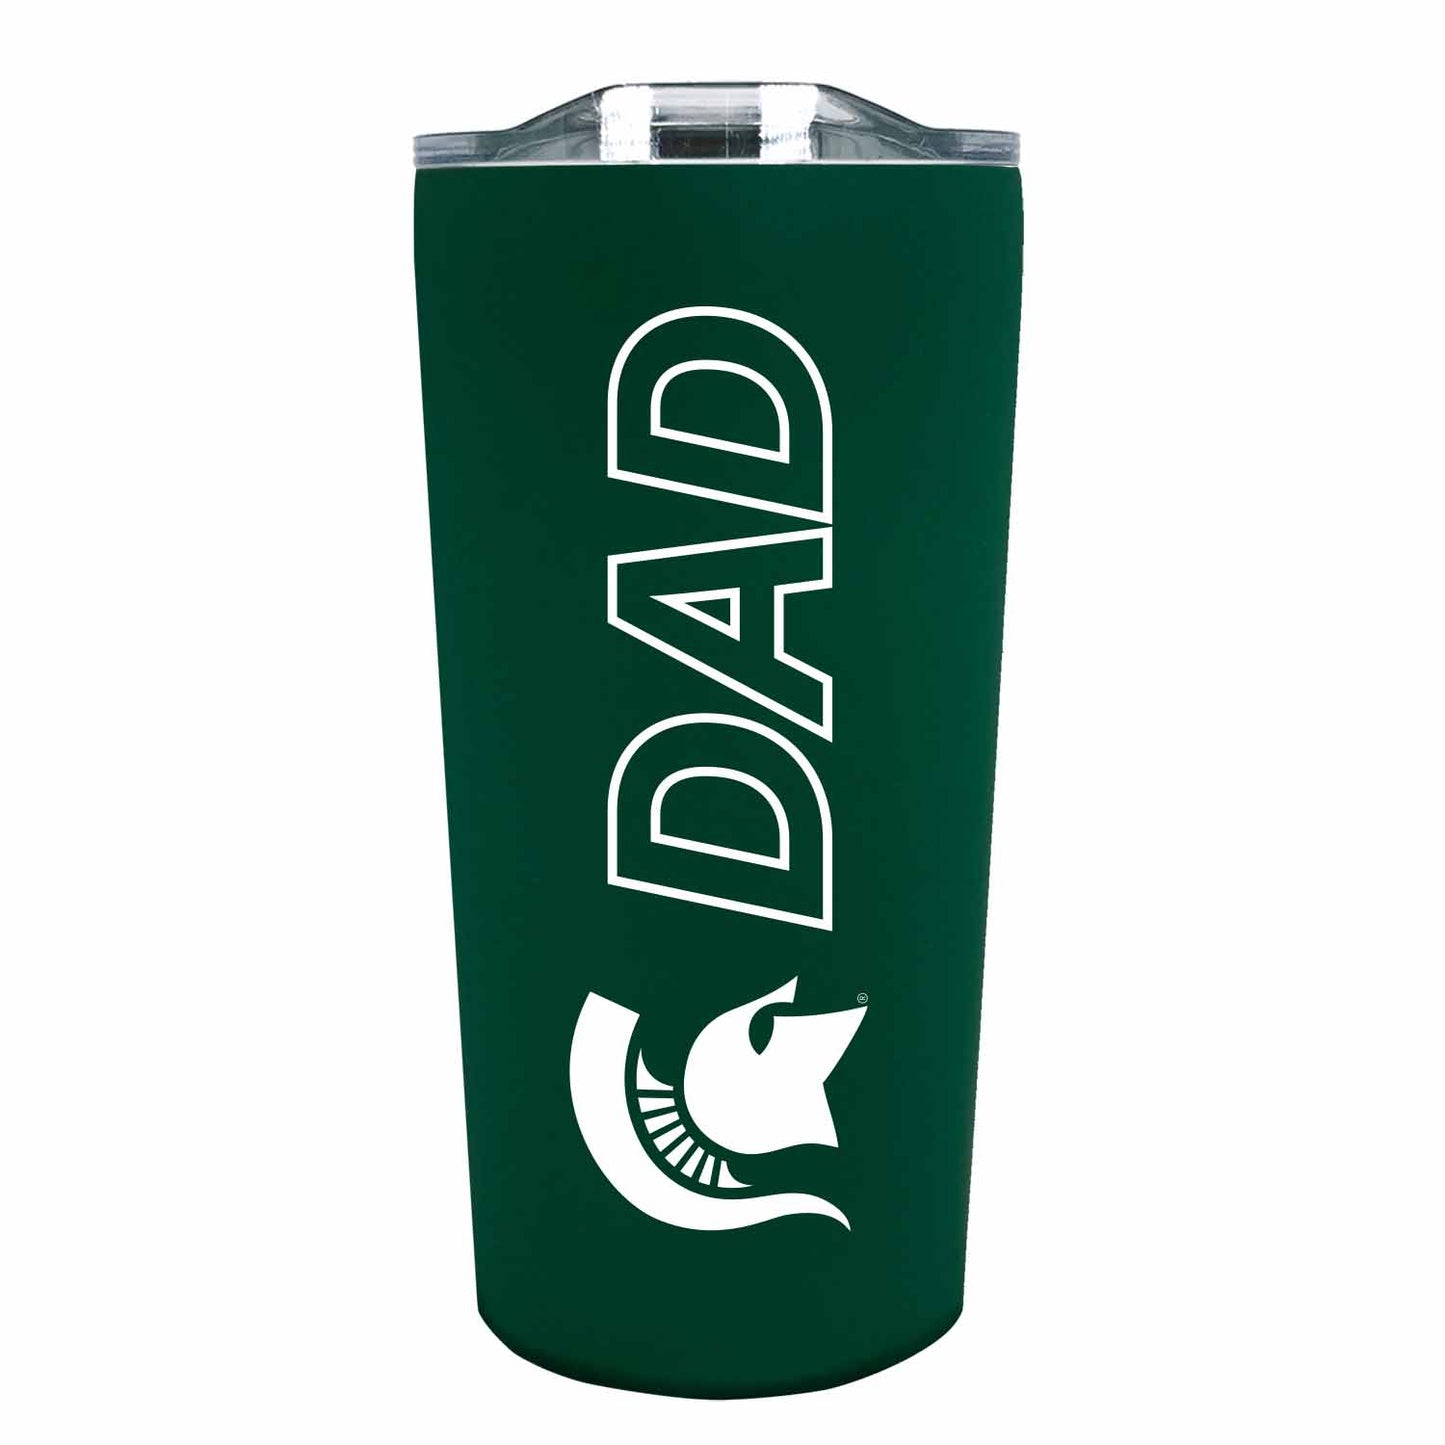 Michigan State Spartans NCAA Stainless Steel Travel Tumbler for Dad - Green